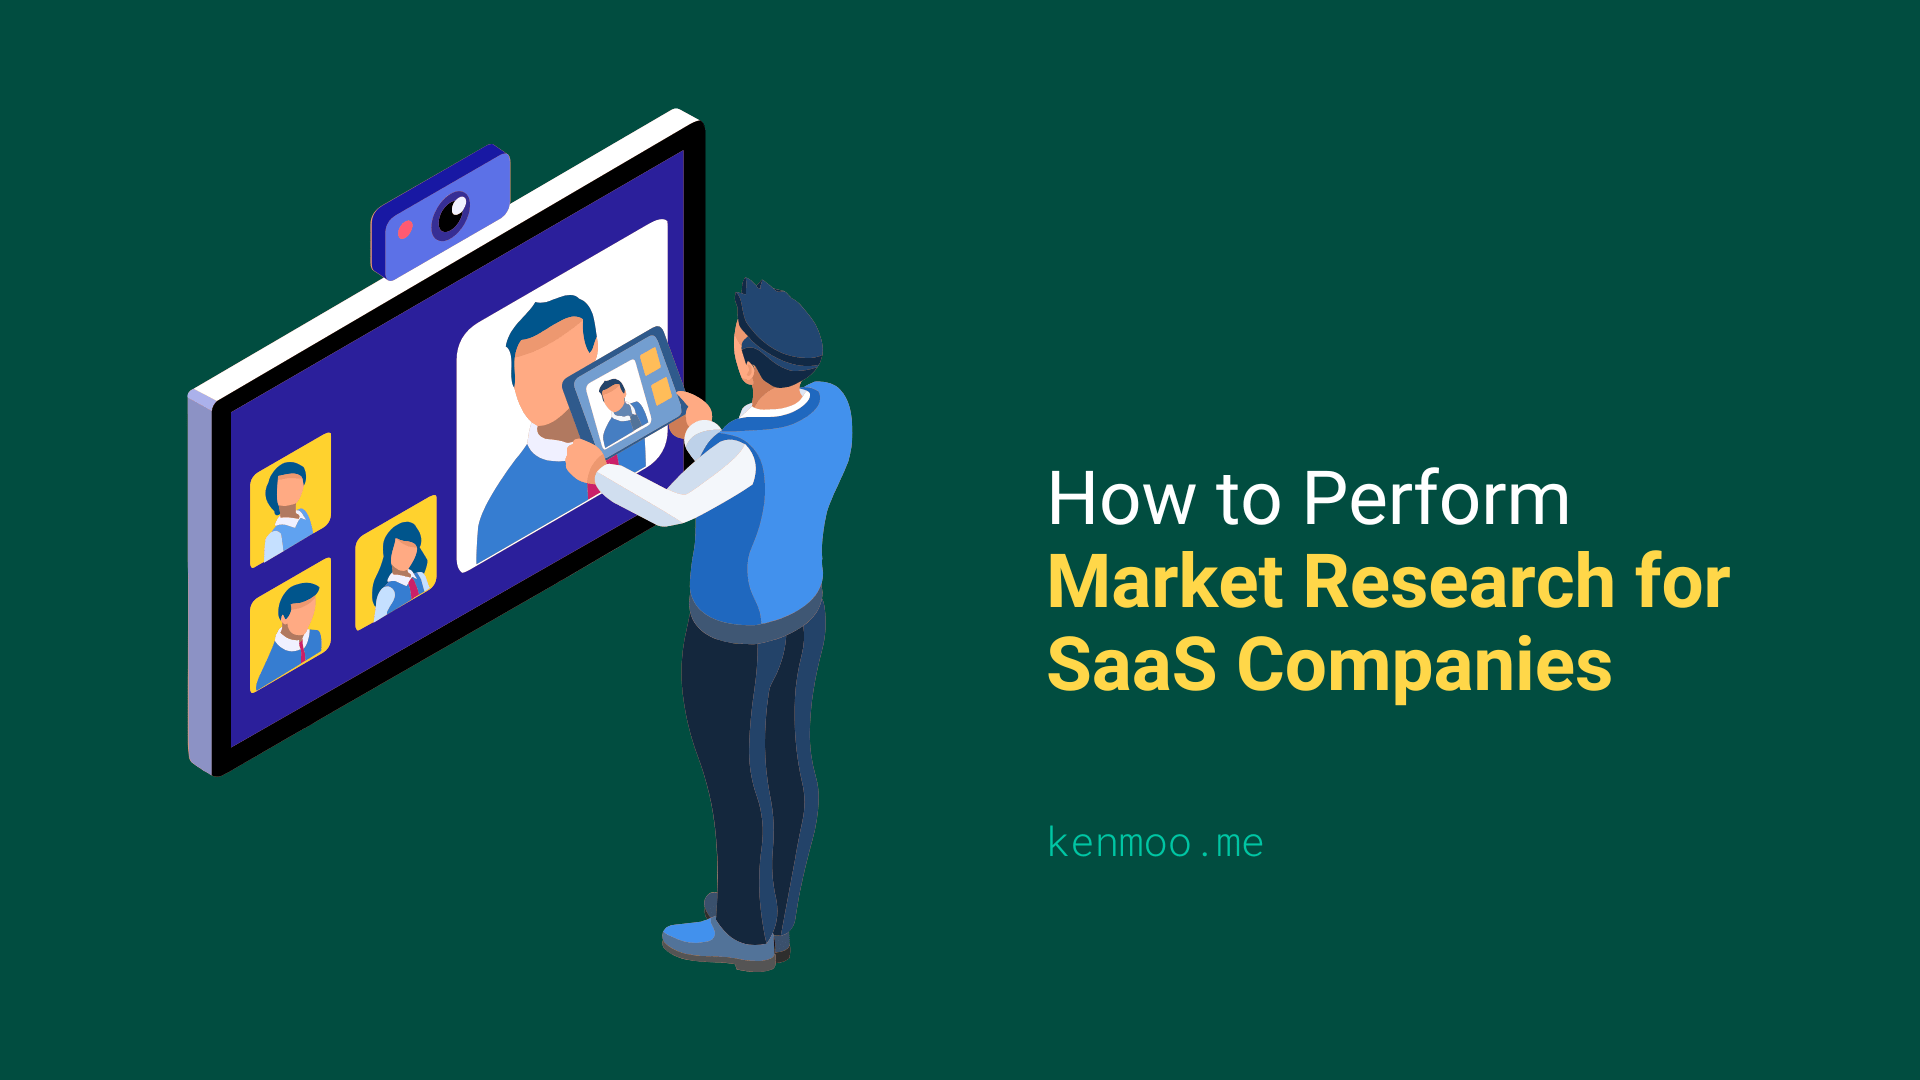 How to Perform Market Research for SaaS Companies